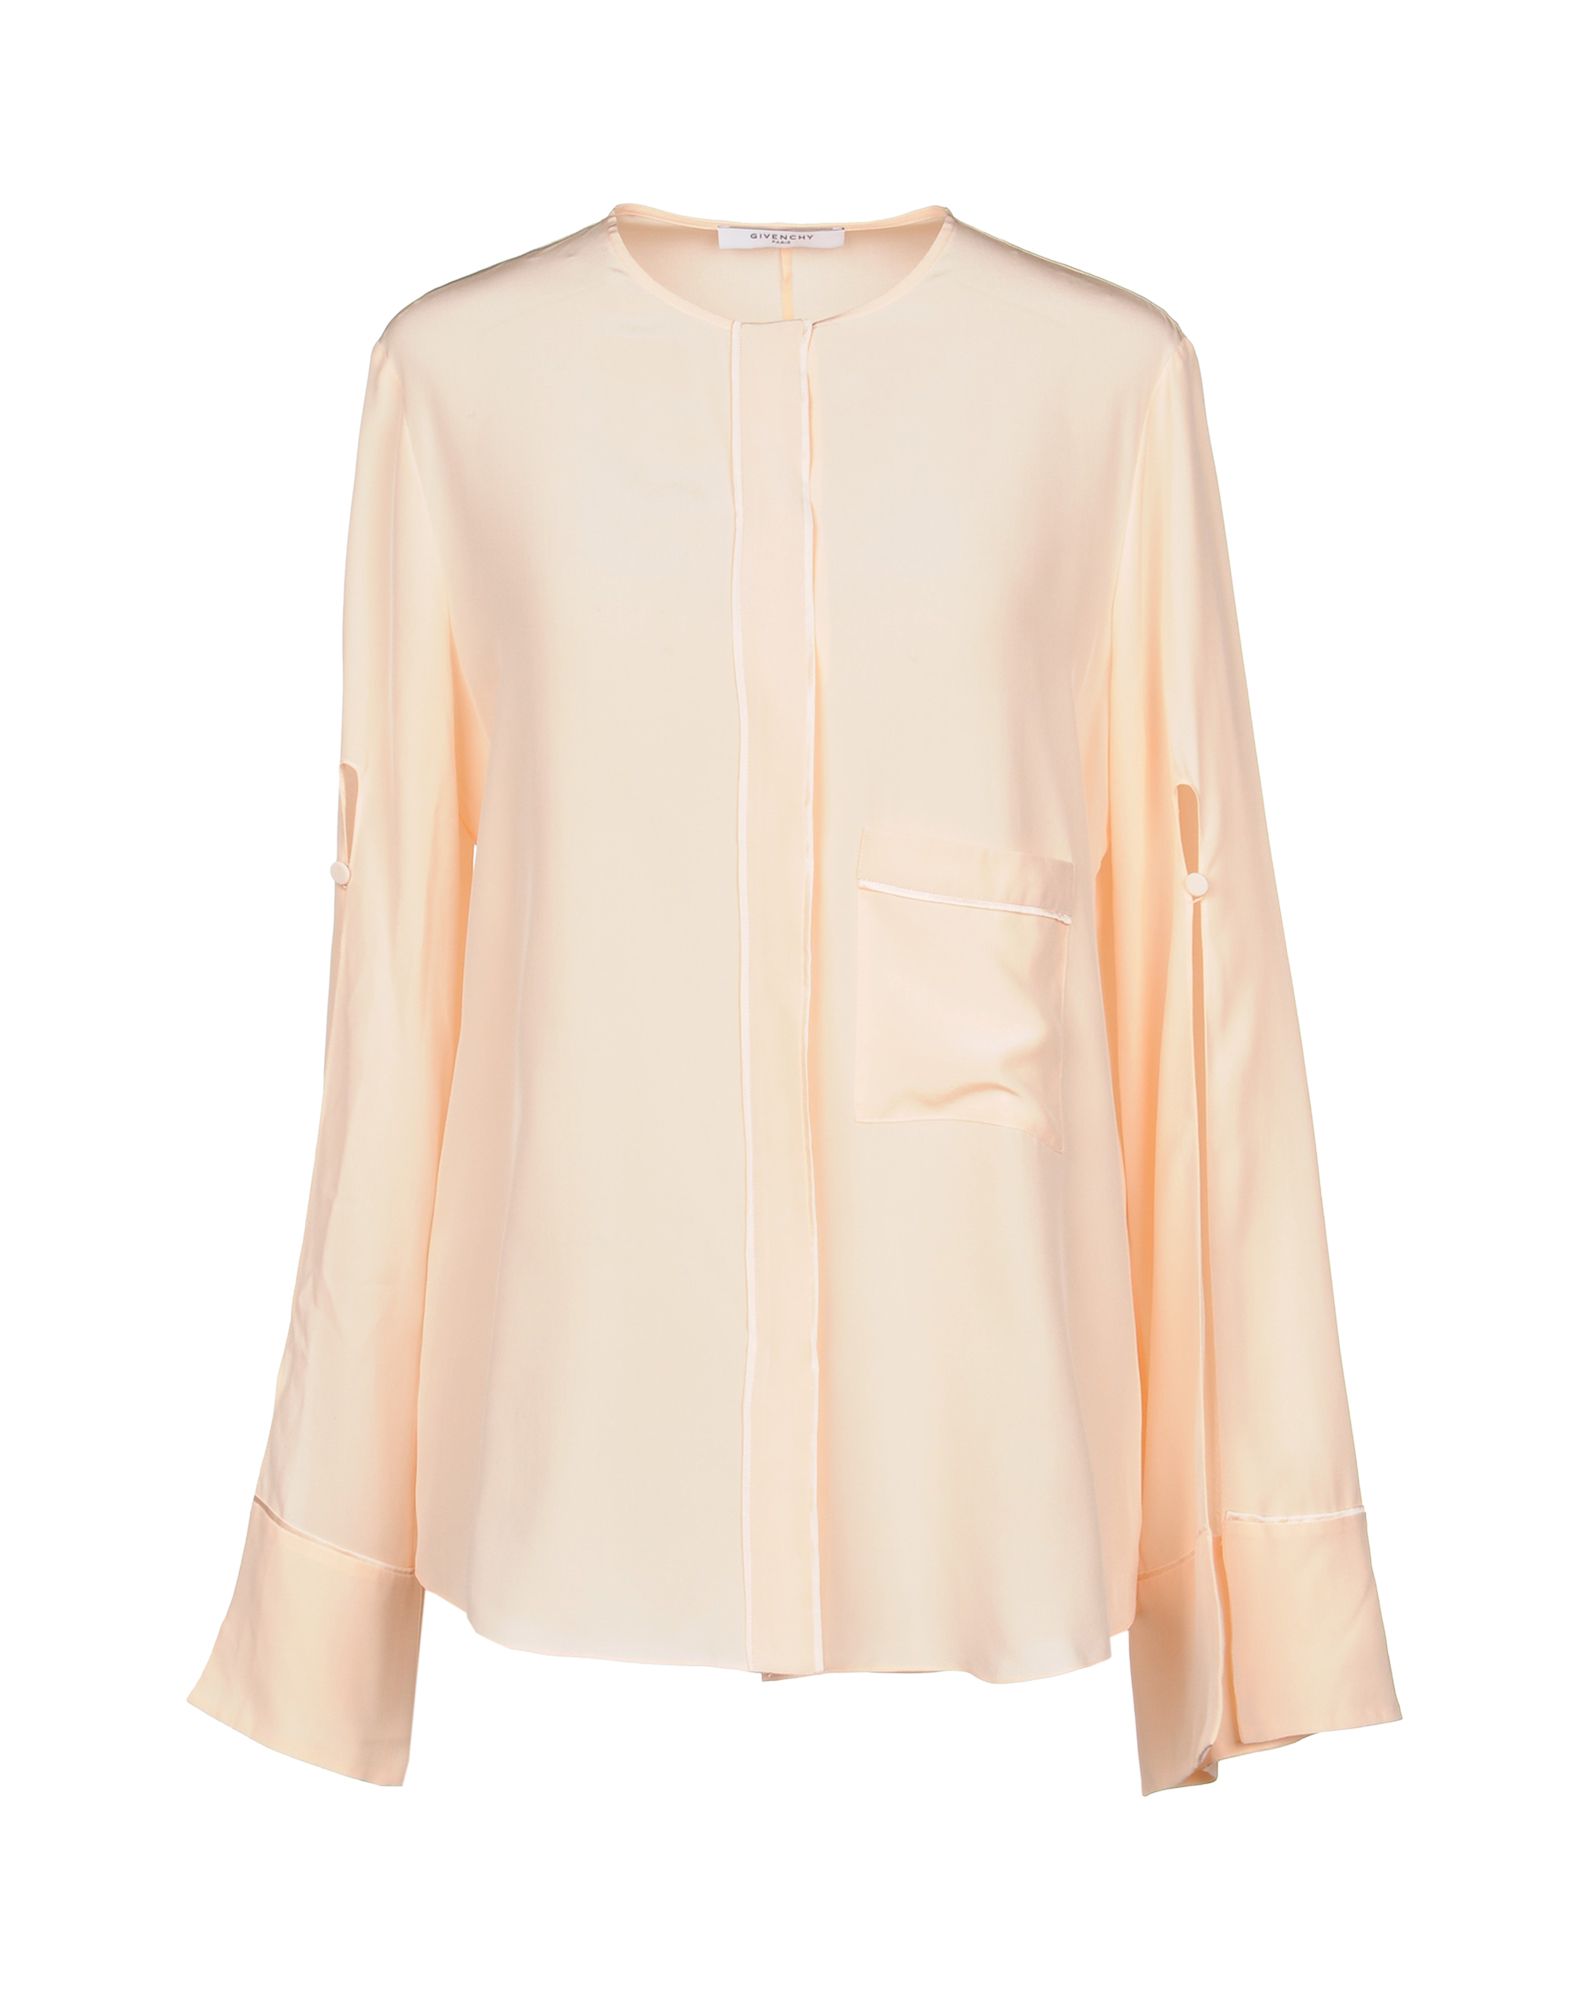 GIVENCHY BLOUSES,38740850HL 6